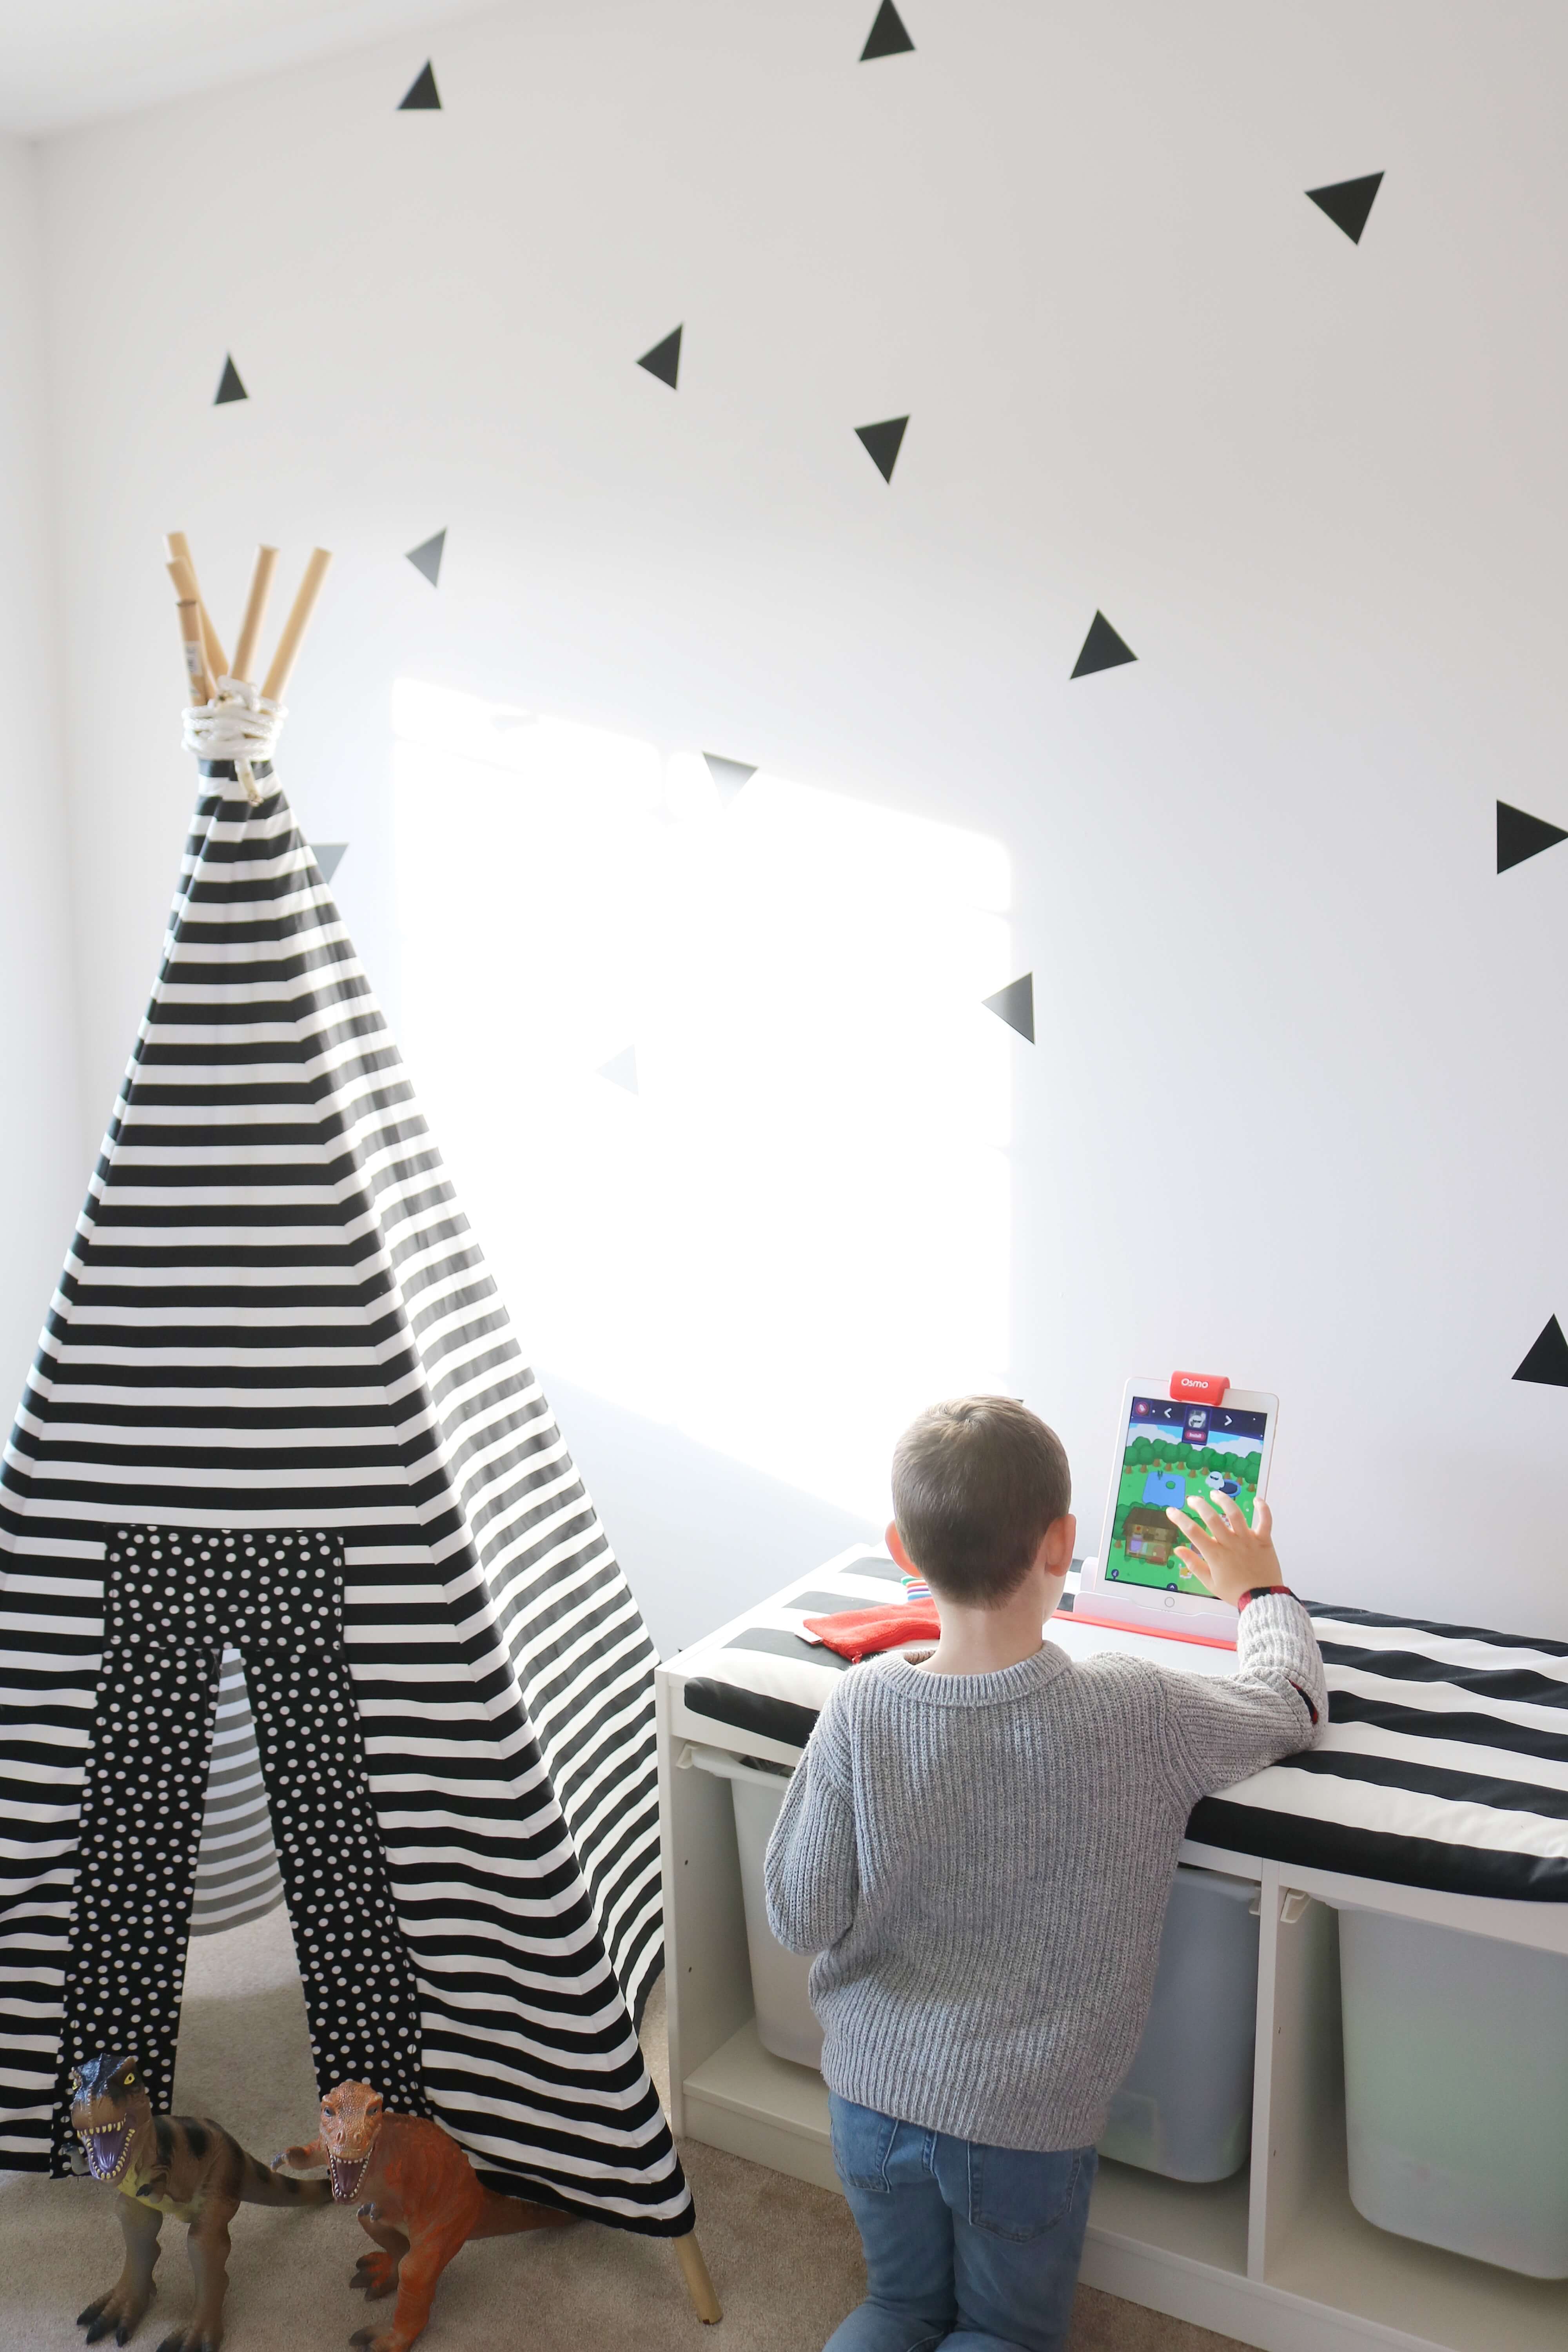 Review of the Osmo Creative Creative Starter Kit 